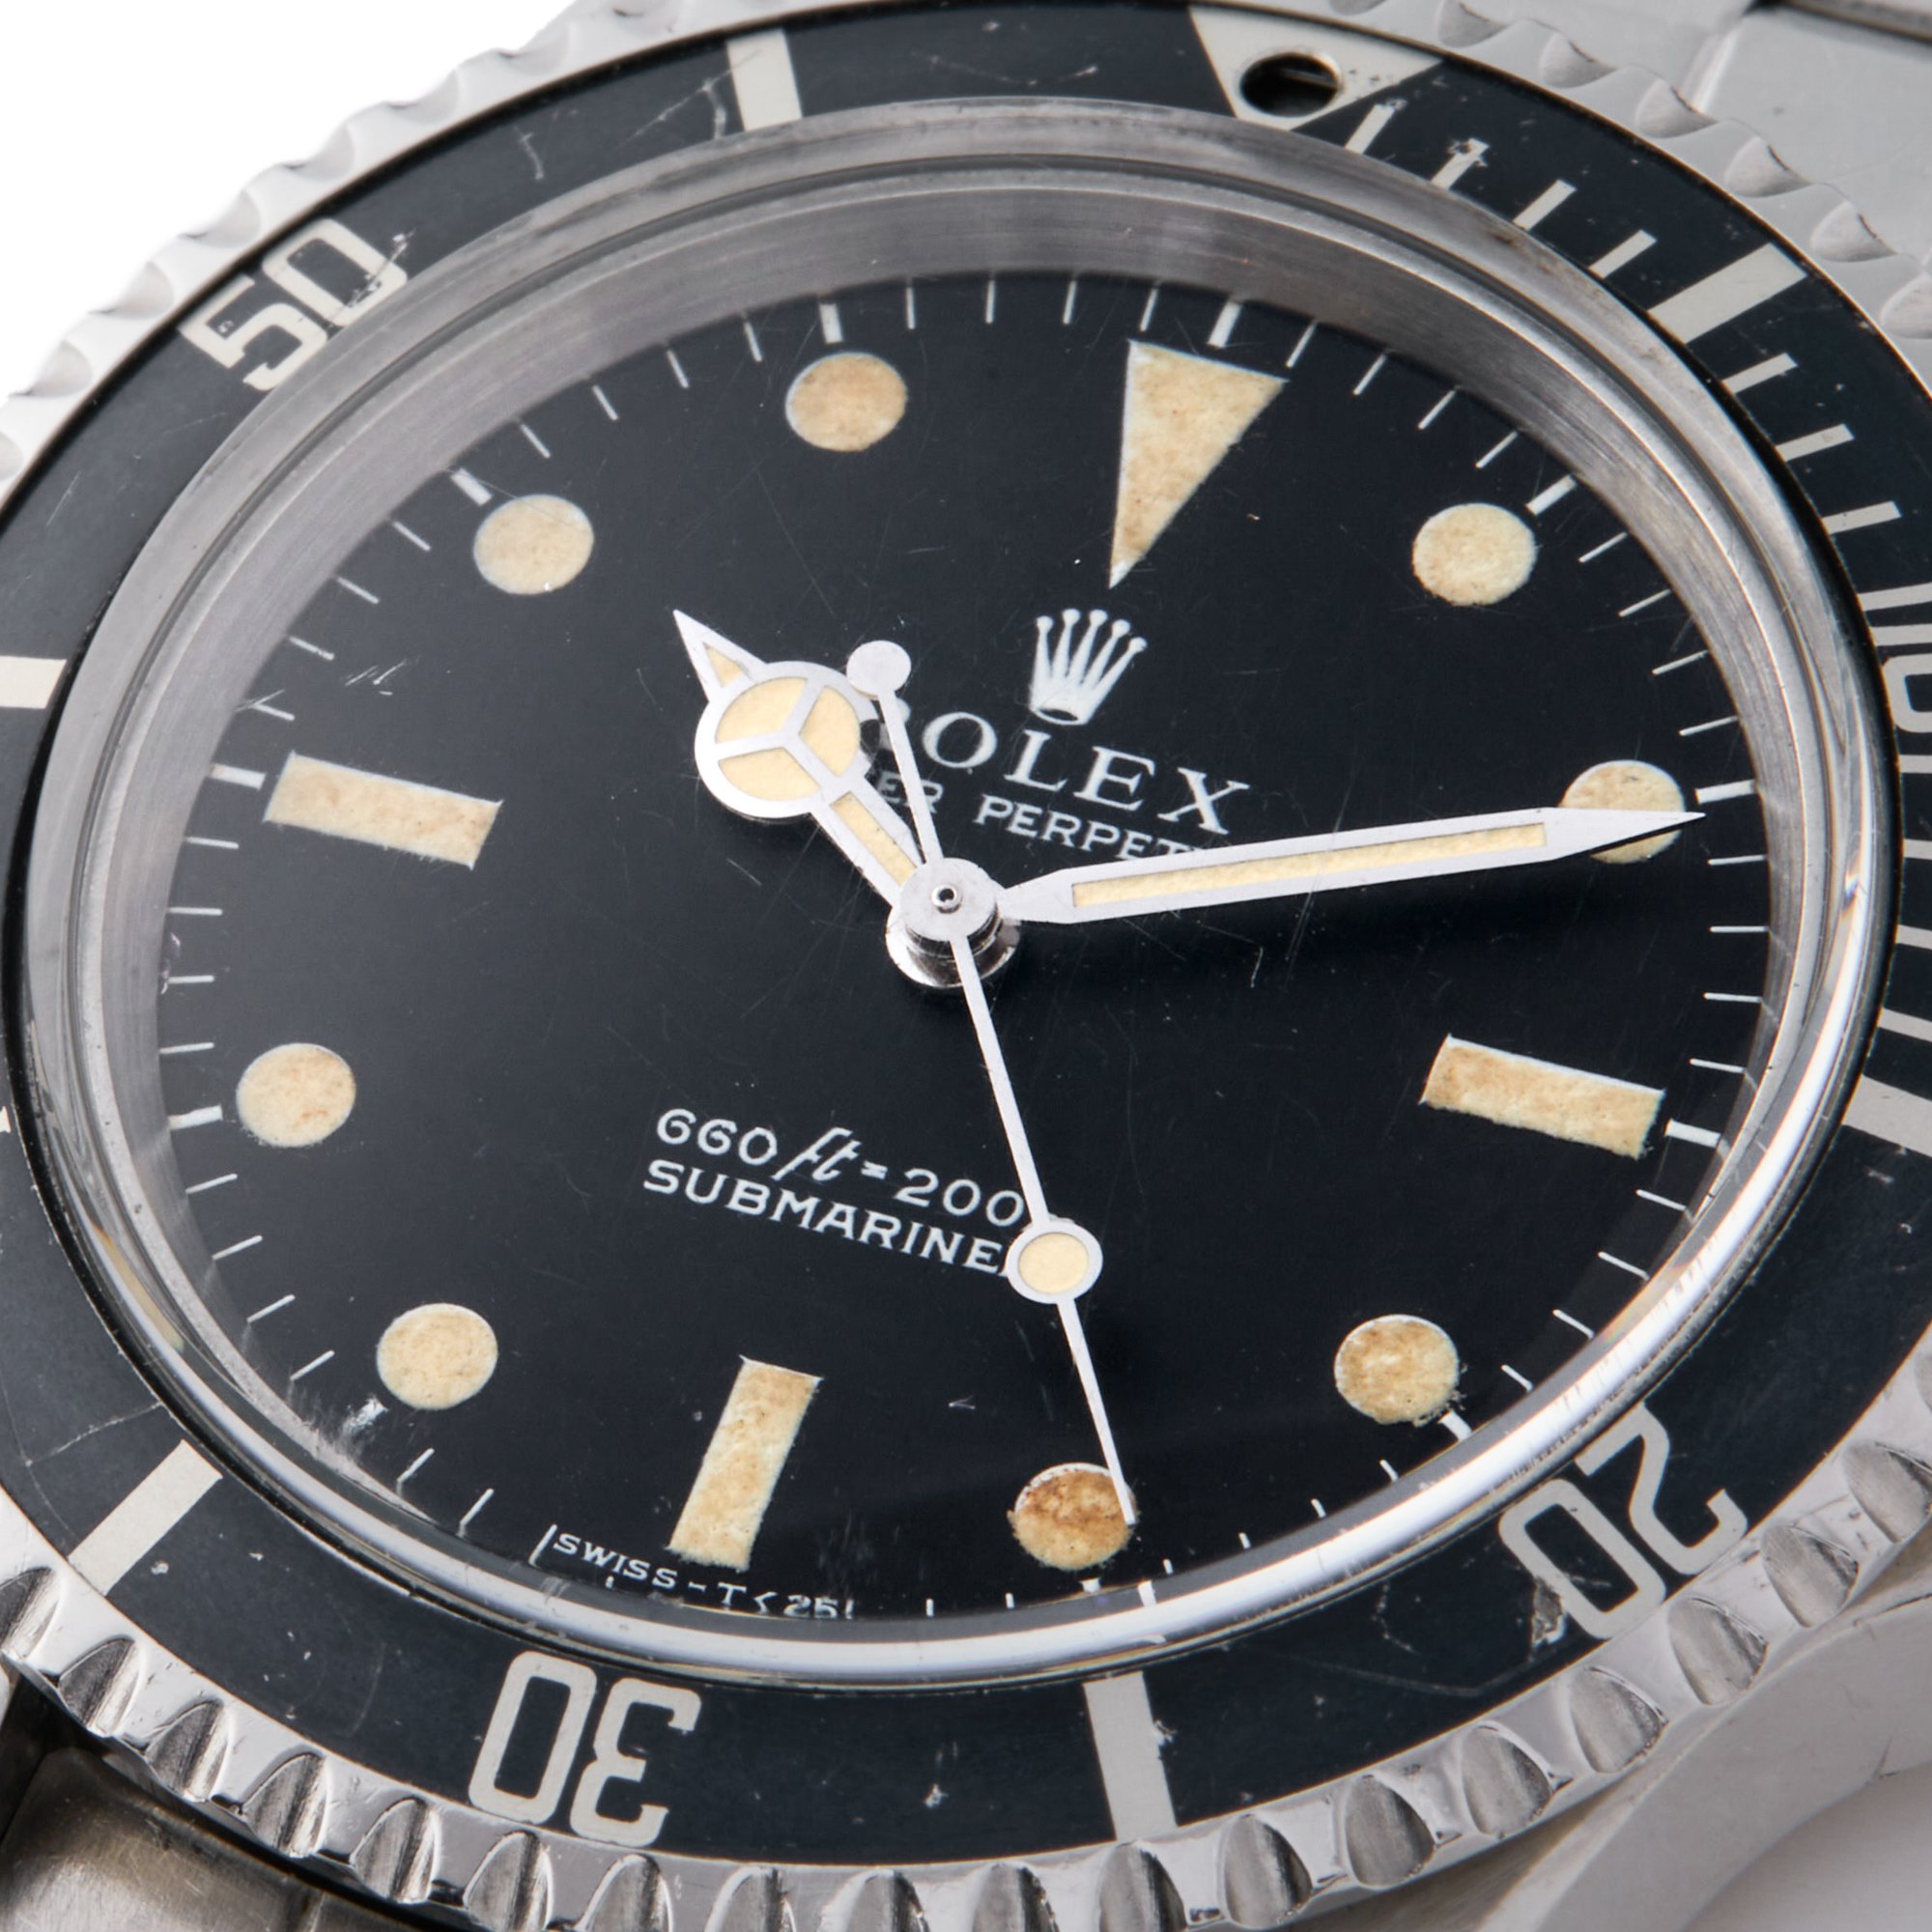 Rolex Submariner Non Date Feet First Roestvrij Staal 5513